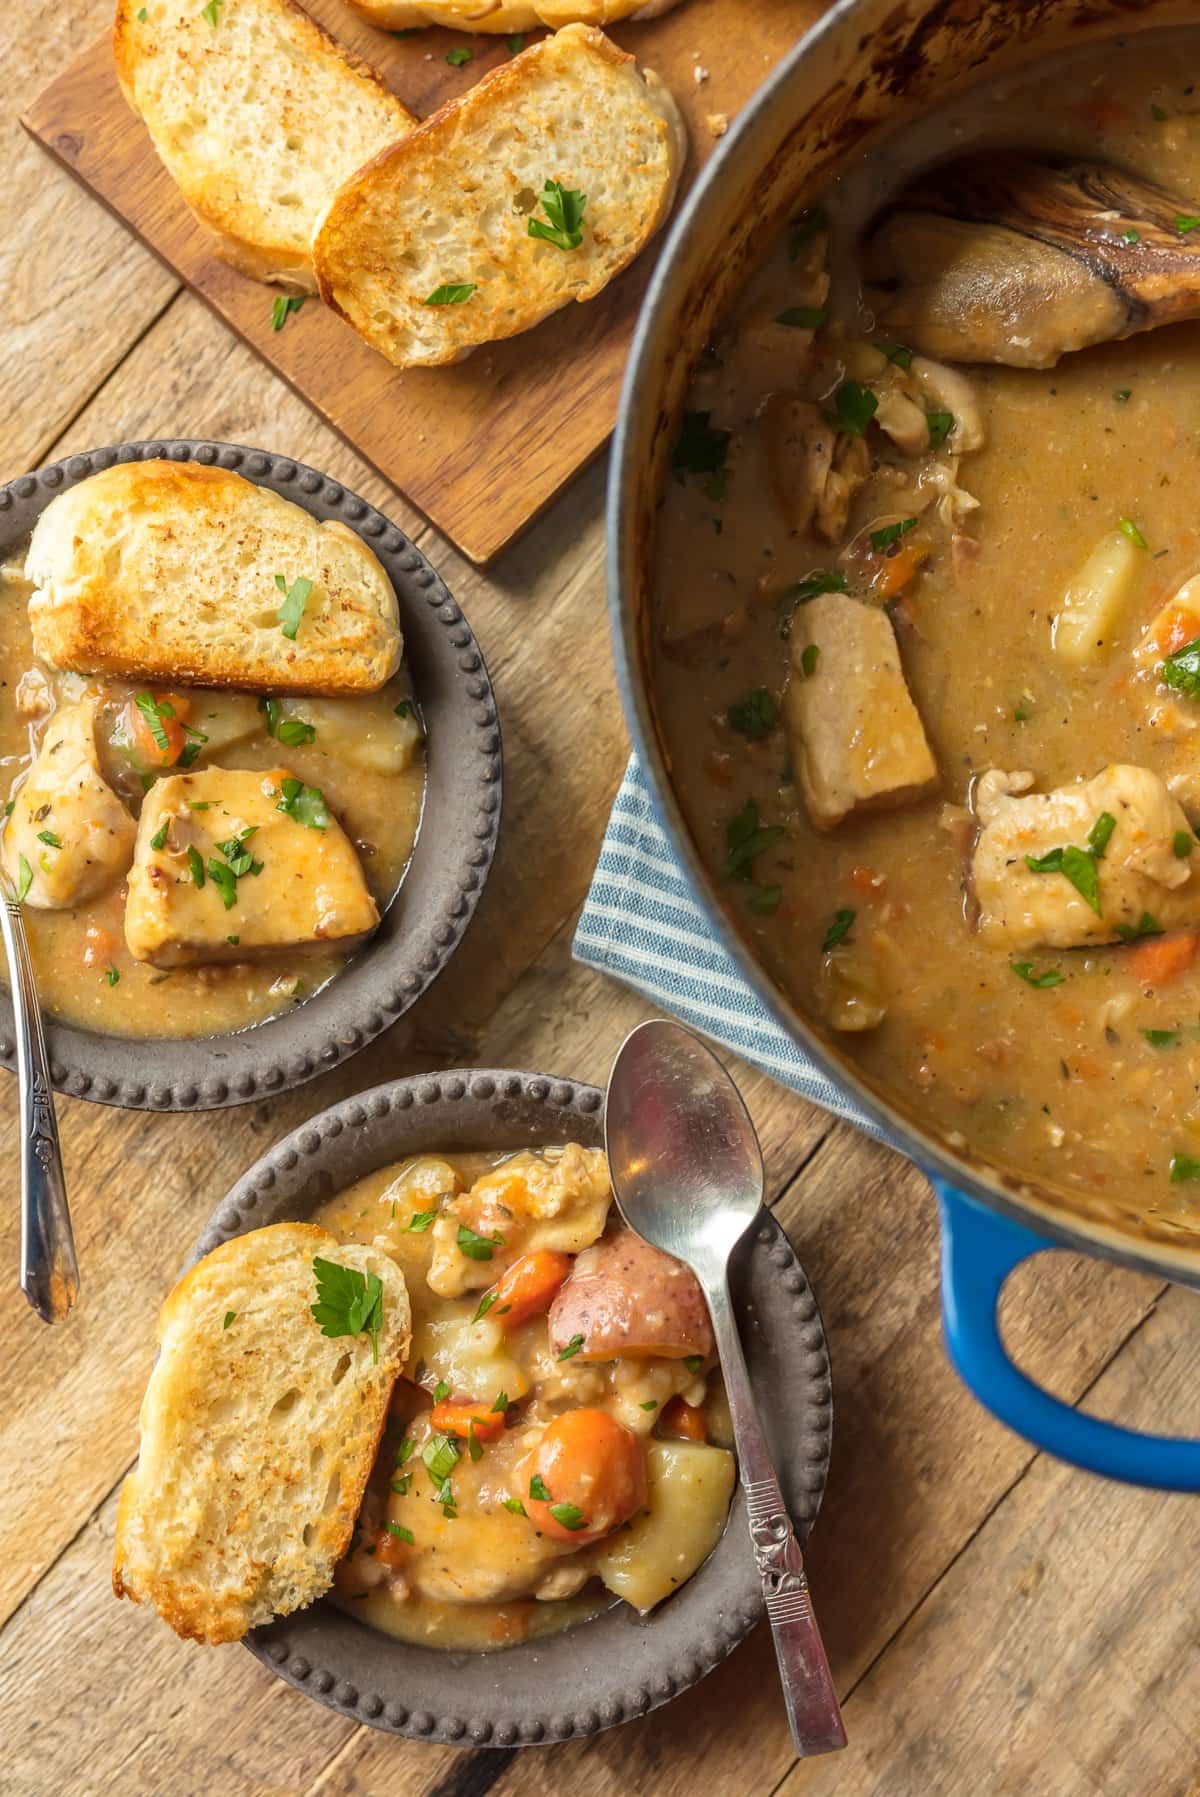 Bowls of chicken stew with crusty bread